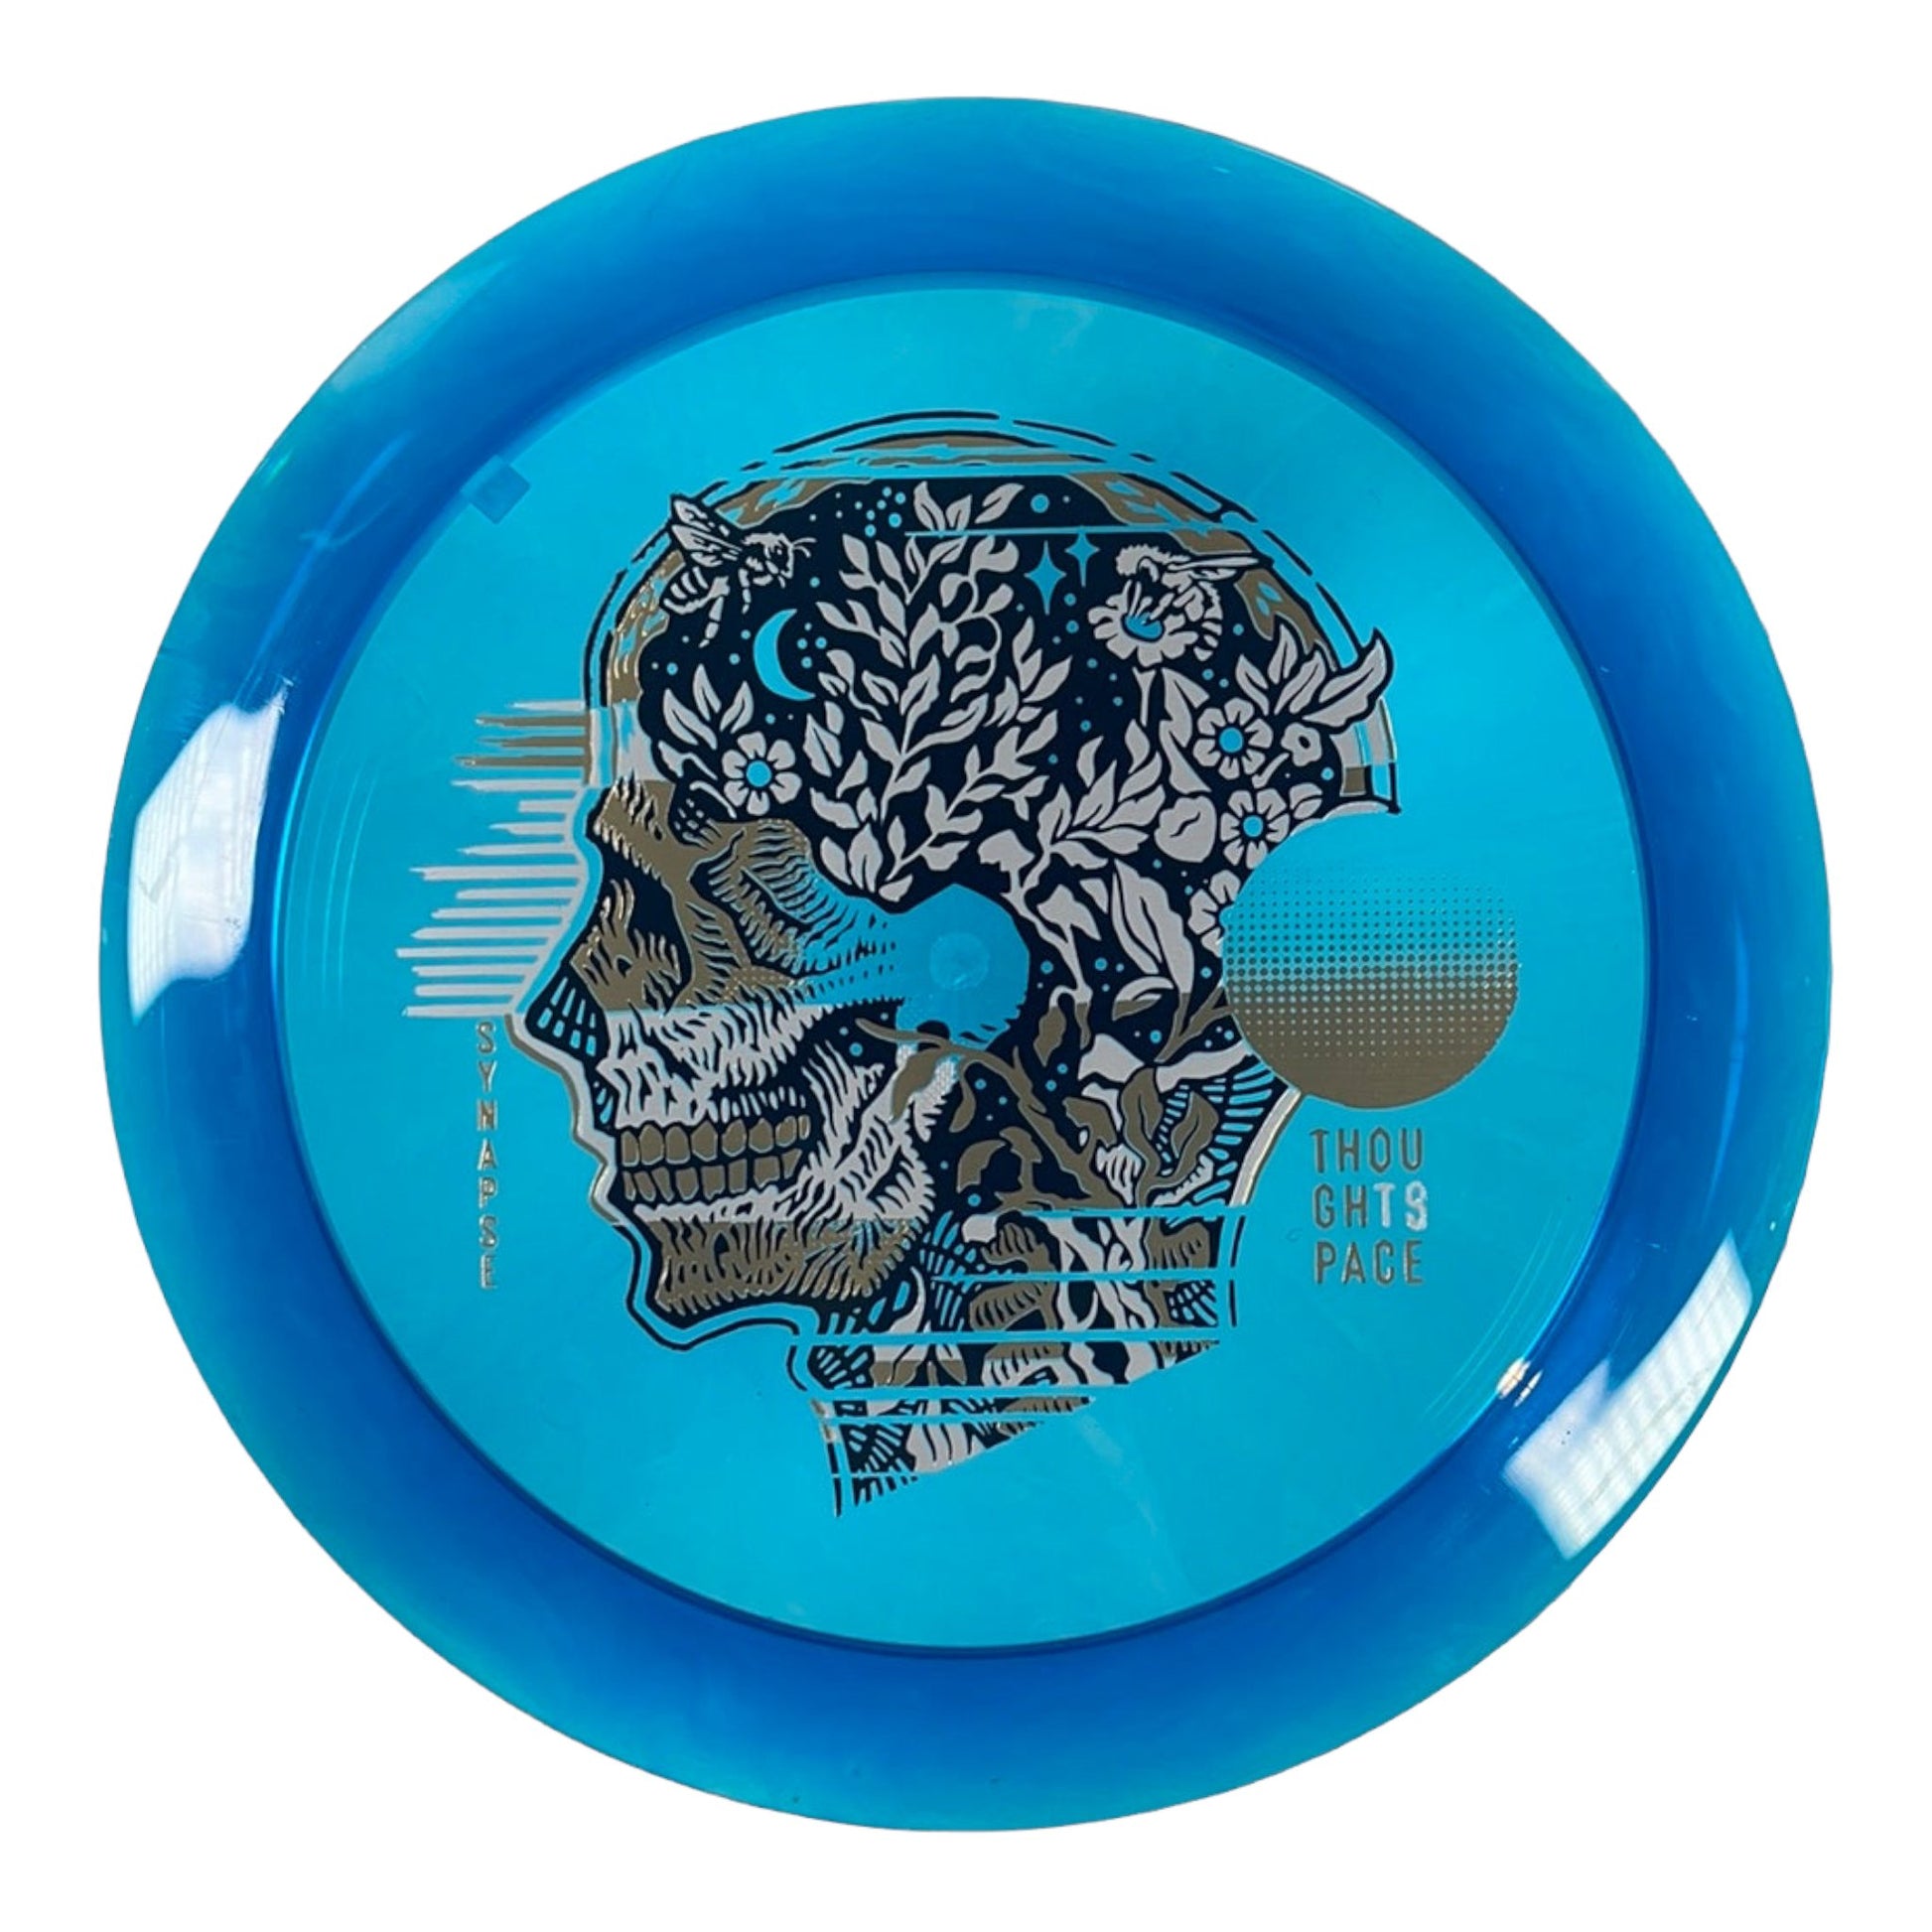 Thought Space Athletics Synapse | Ethos | Blue/Gold 173g Disc Golf